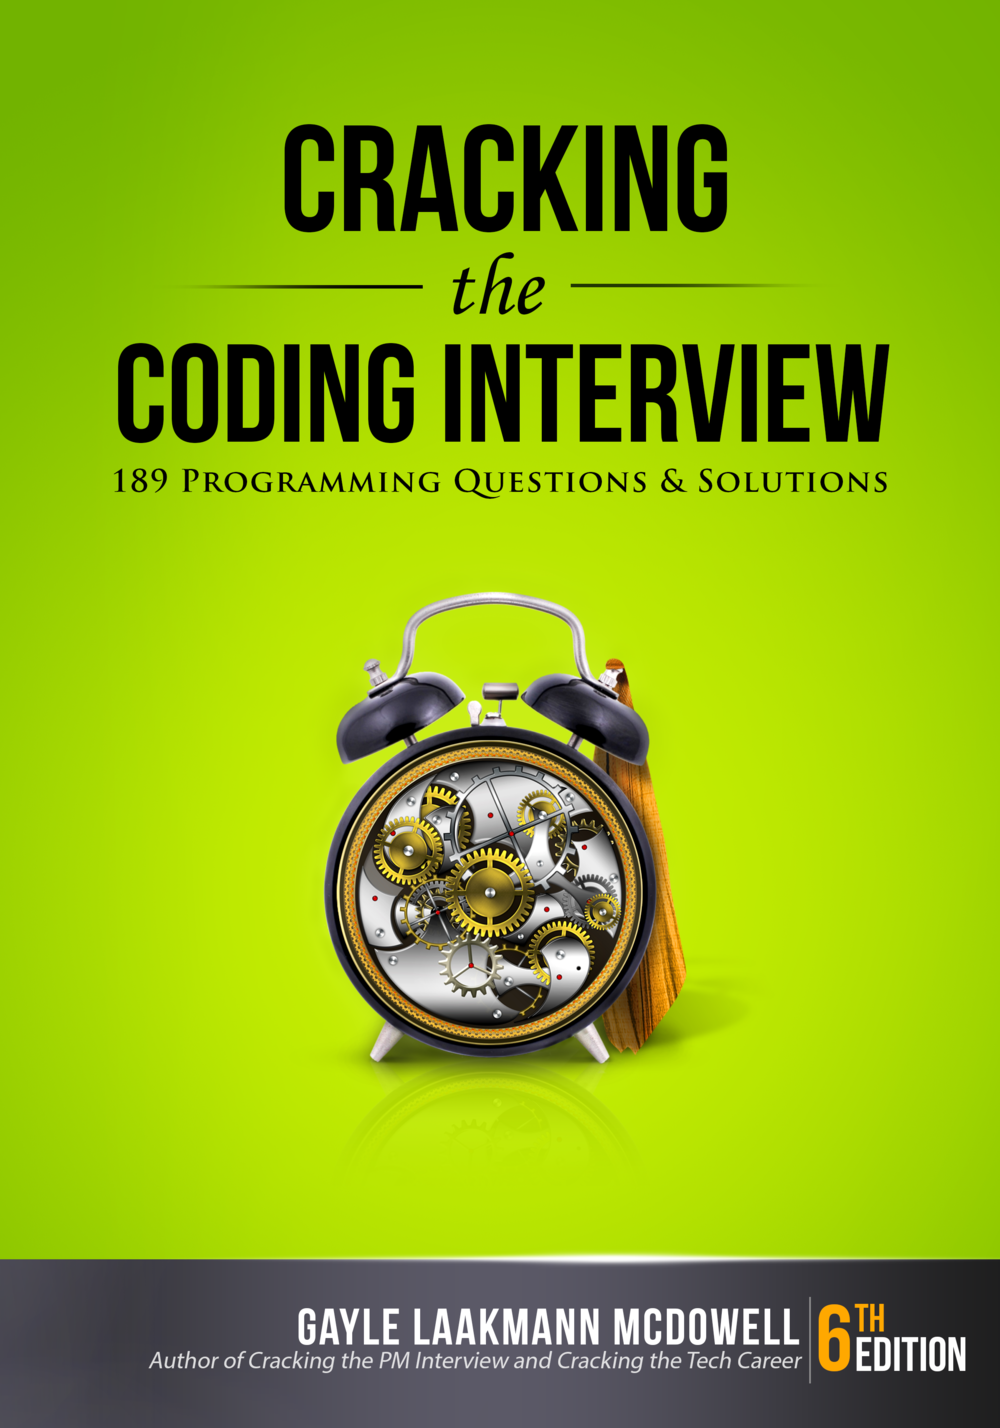 cracking the coding interview 6th edition pdf download free